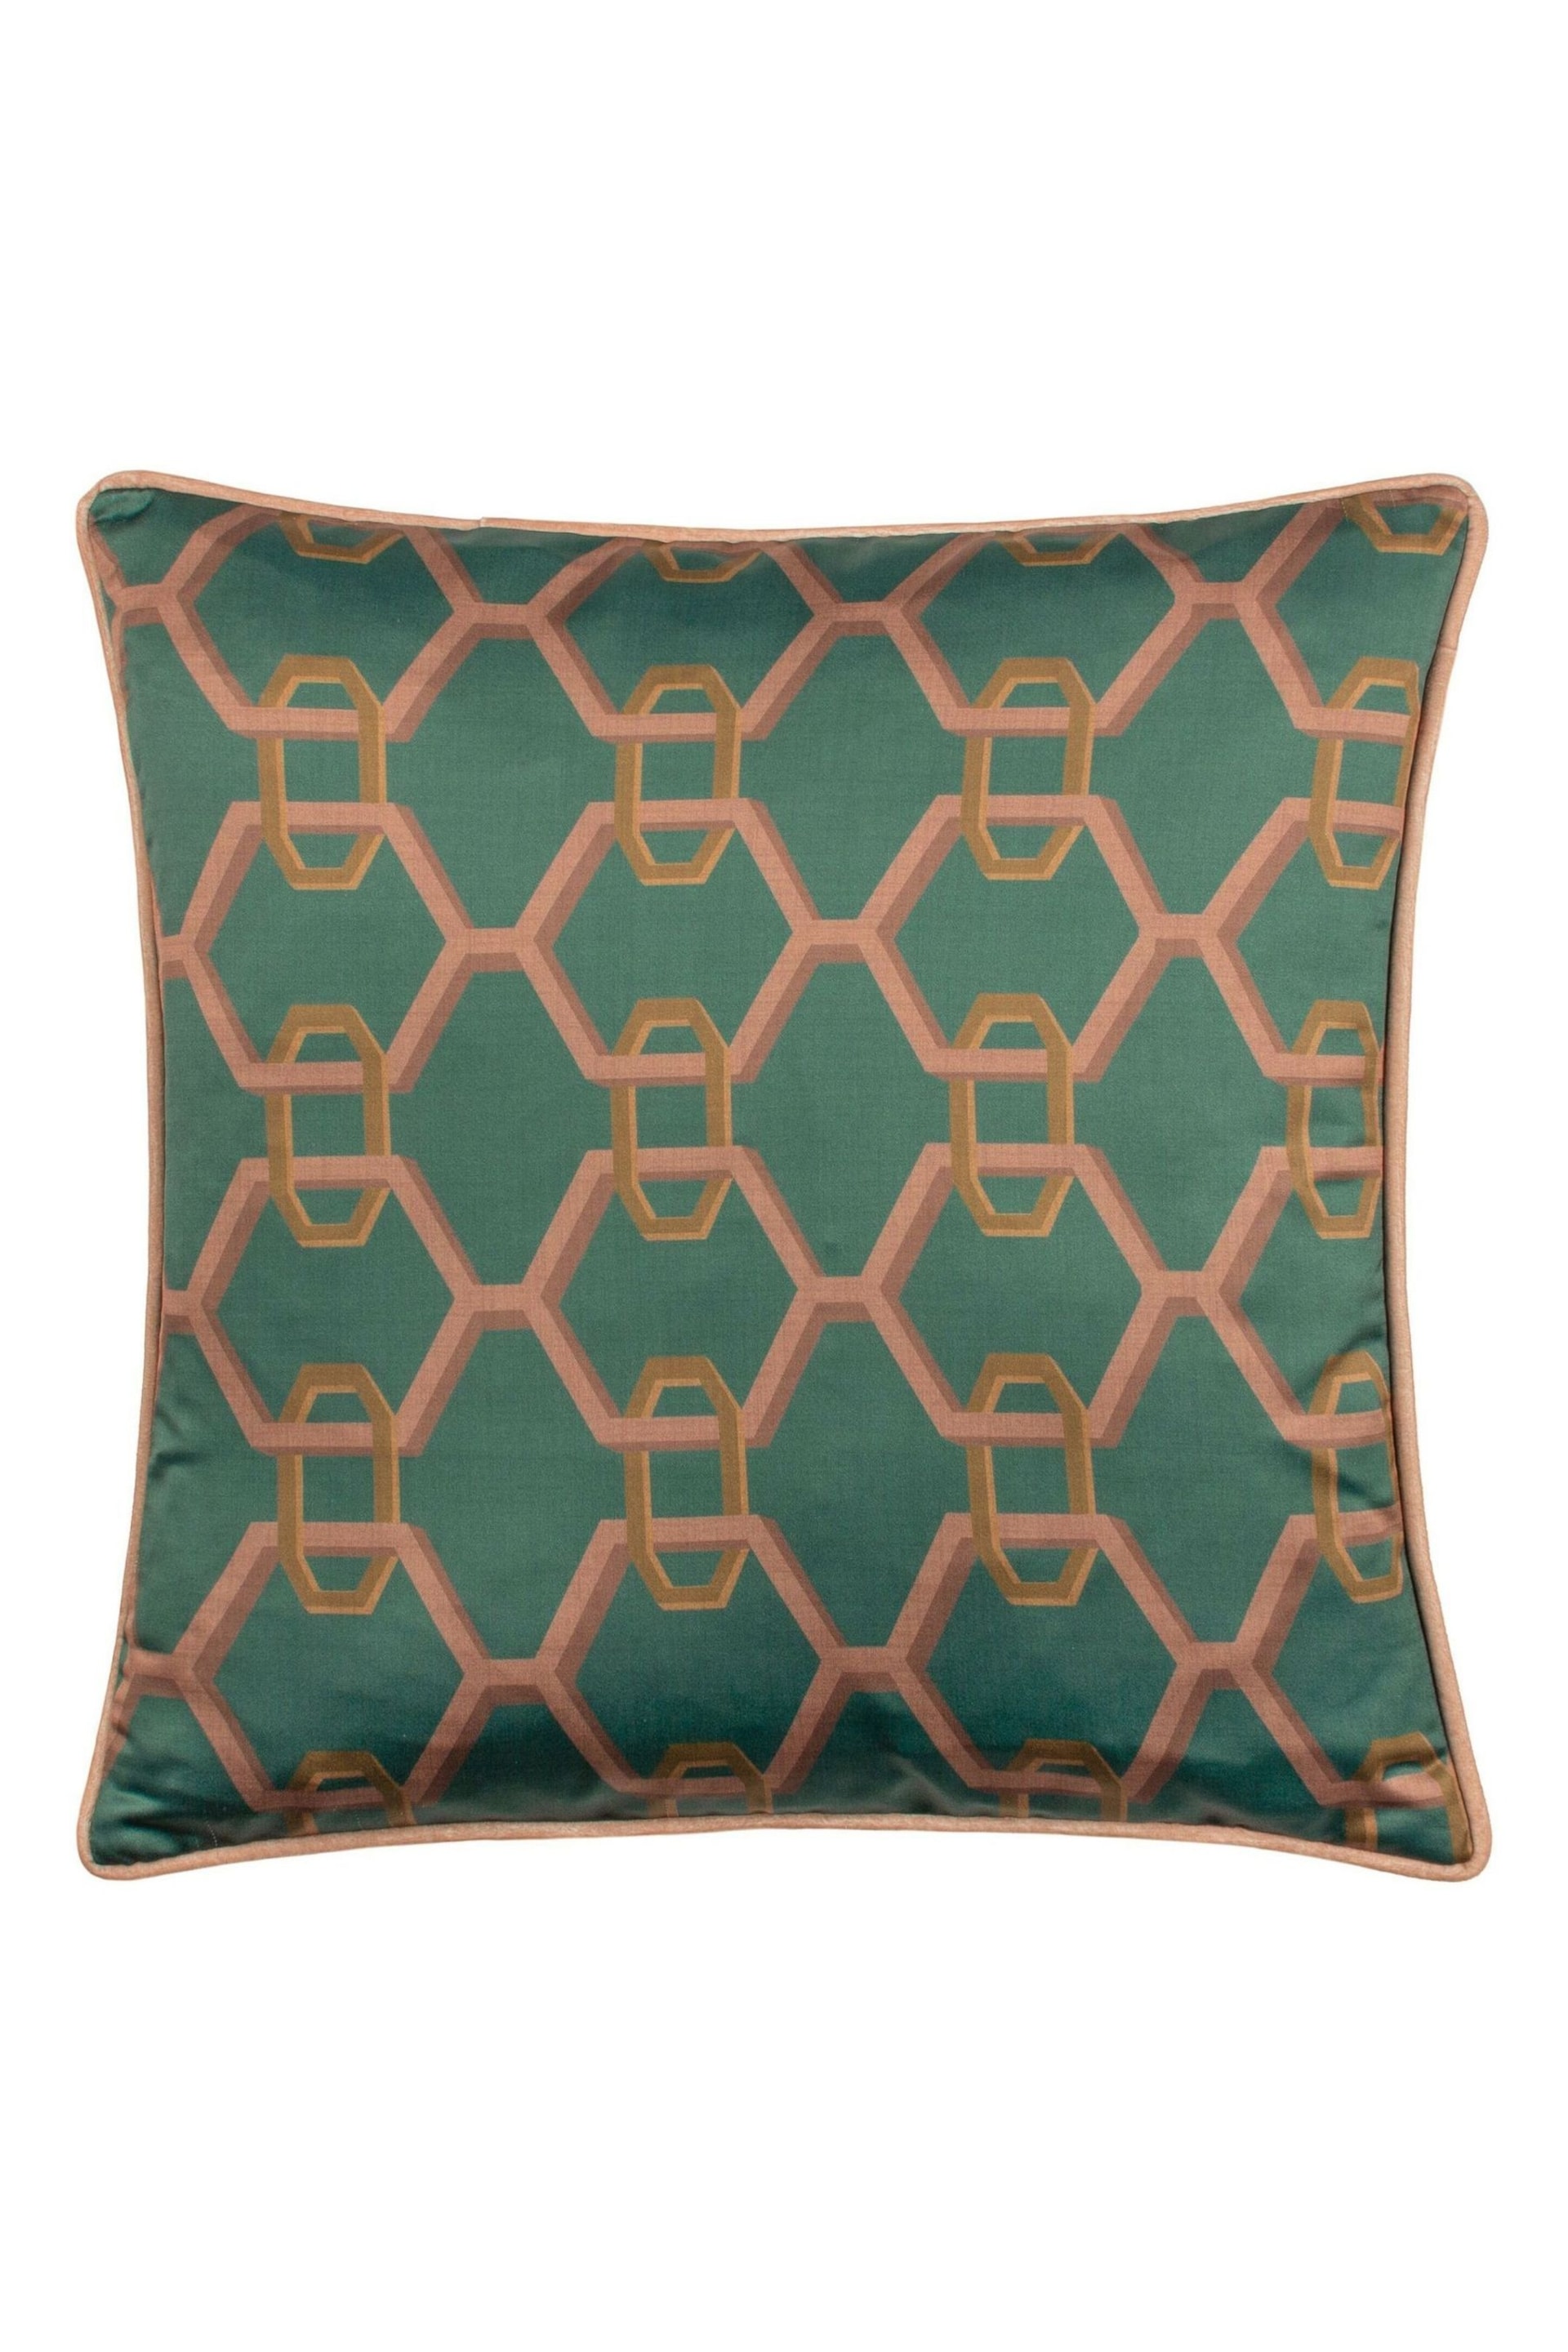 Paoletti Blue Carnaby Chain Geometric Satin Polyester Filled Cushion - Image 2 of 5